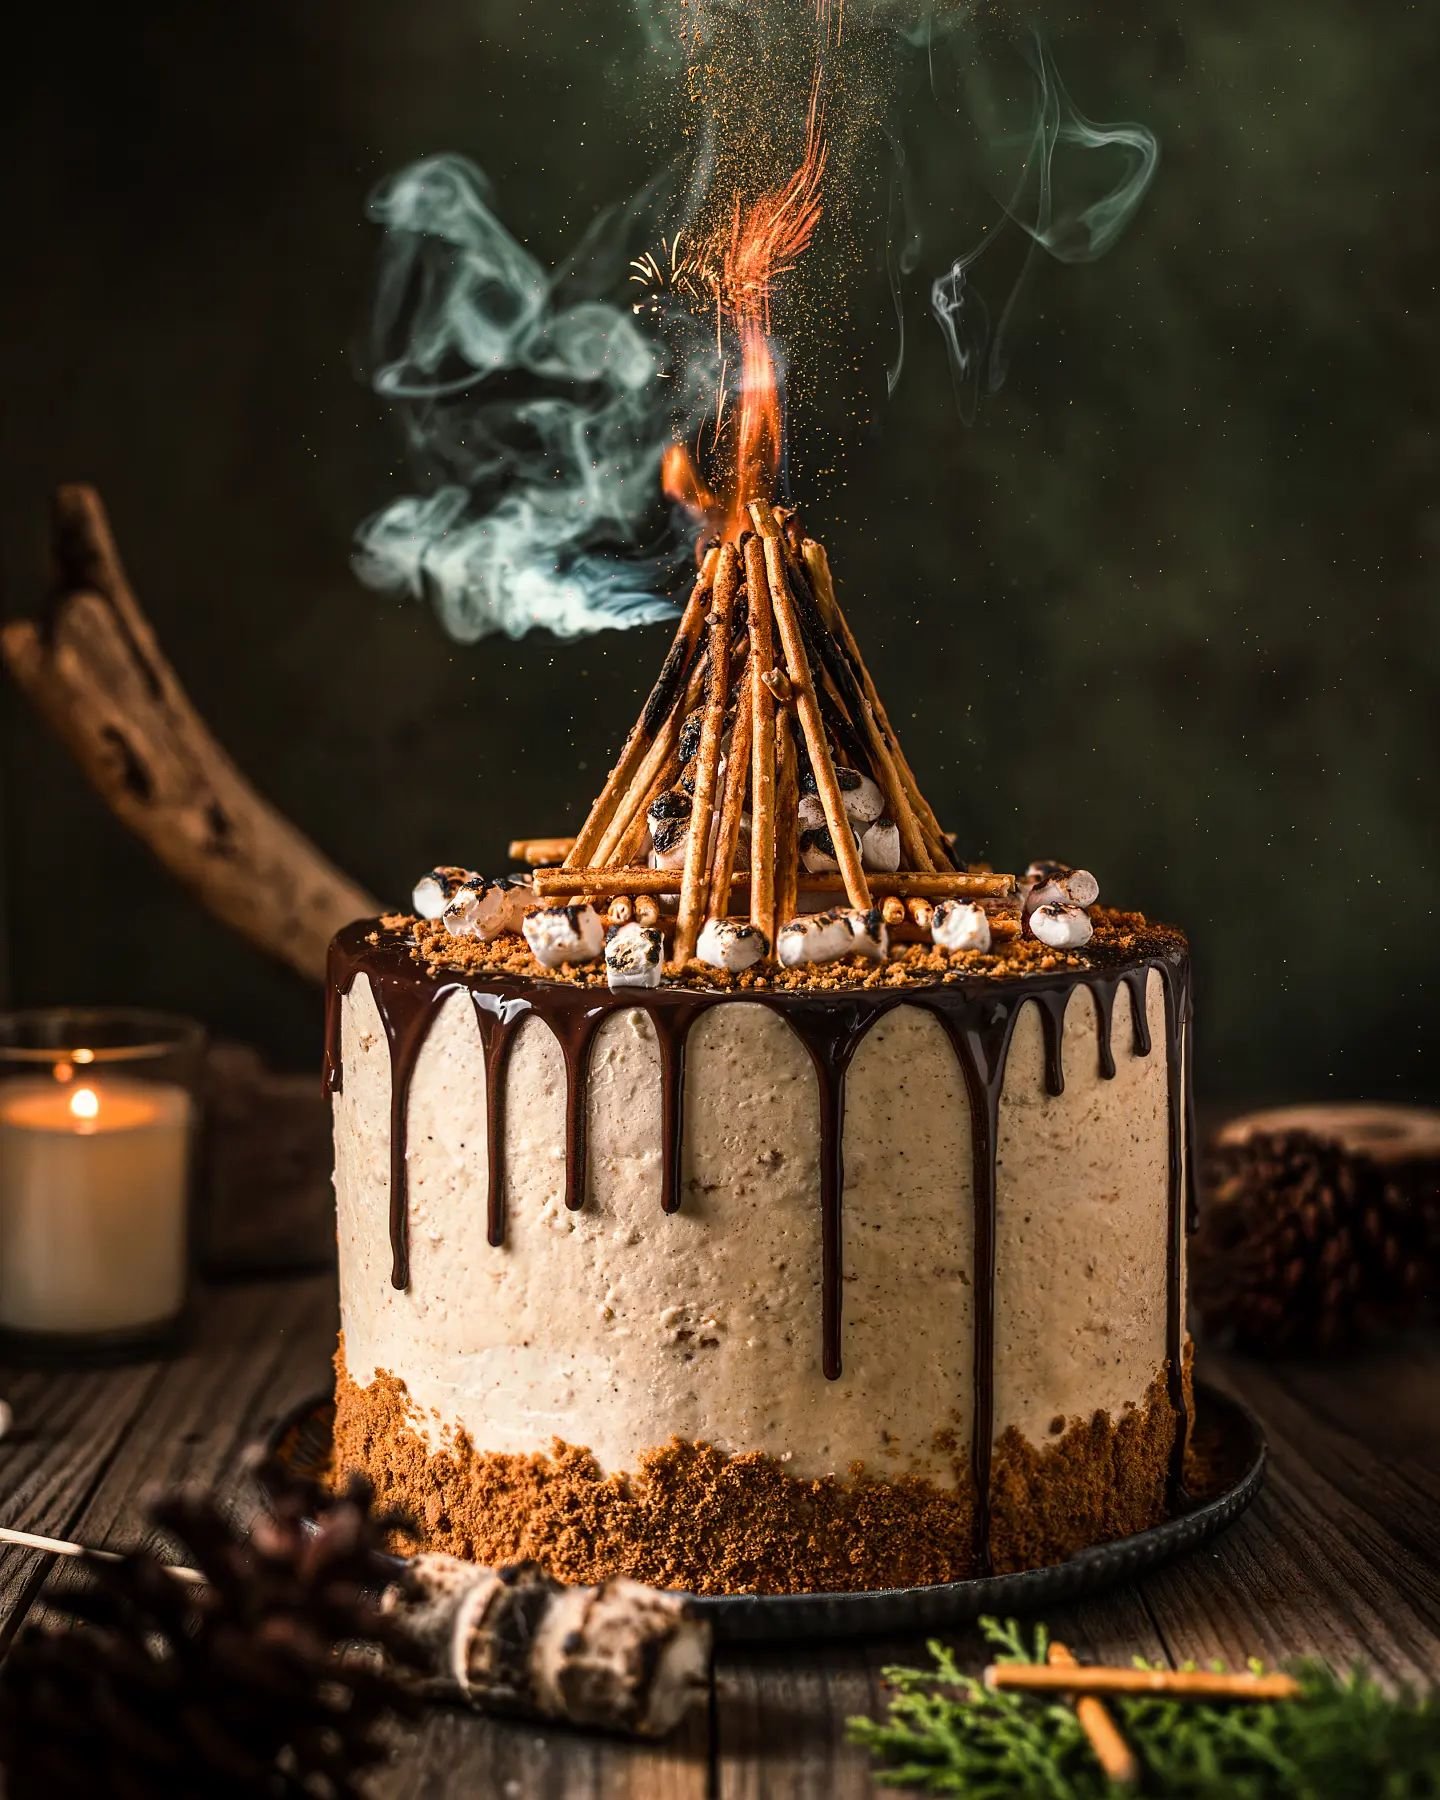 This year's excuse-for-cake cake. i.e., birthday cake.

Who needs a candle when you can have the entire campfire?

(Well, actually I lie, I have a candle in the background. But I know that you know I meant a birthday candle in the cake, not just any 